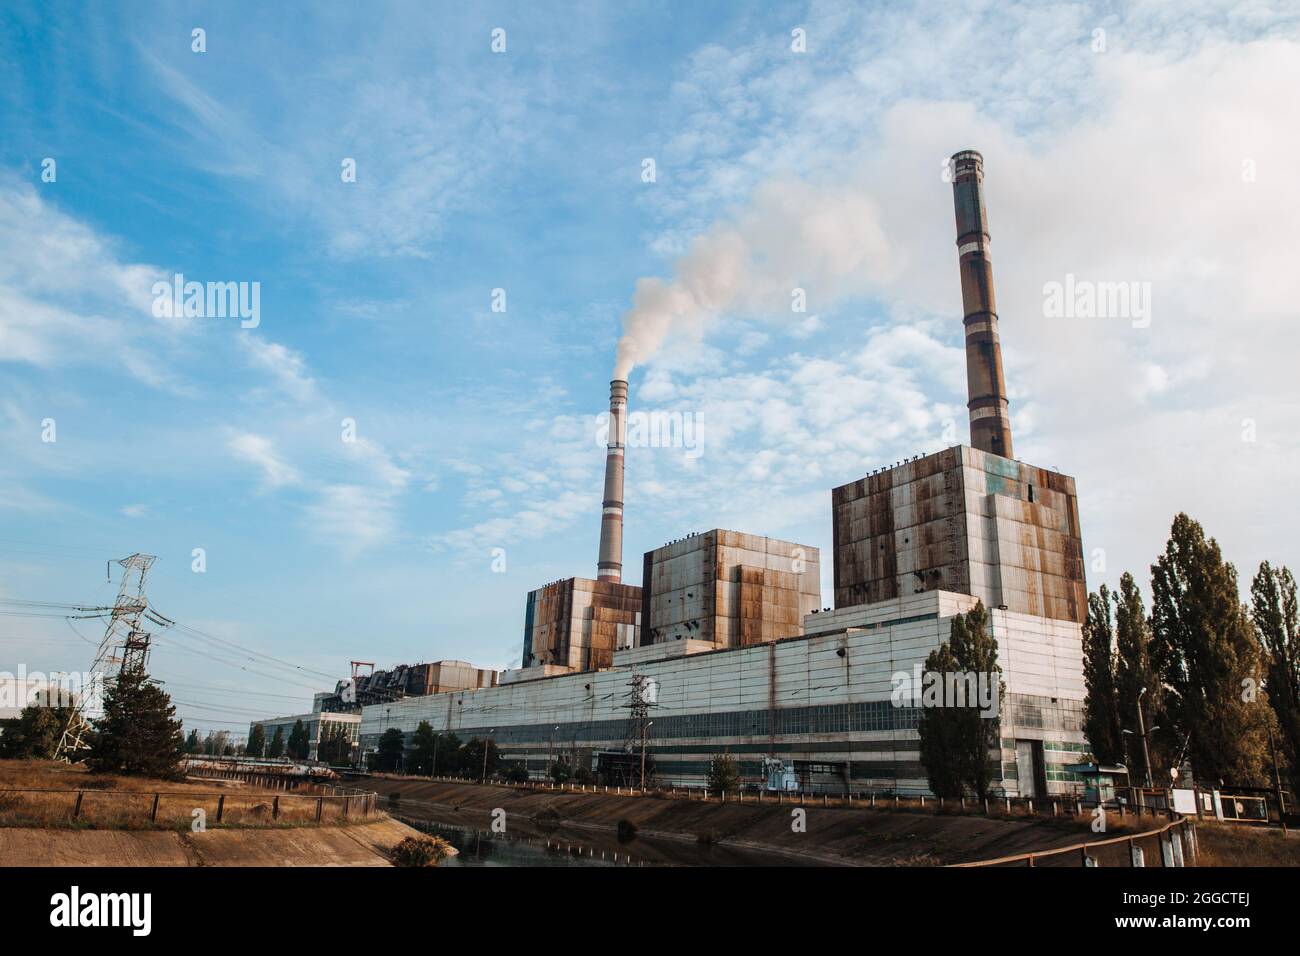 Air pollution, factory pipes, smoke from chimneys on sky background. Concept of industry, ecology, steam plant, heating season, global warming. Stock Photo